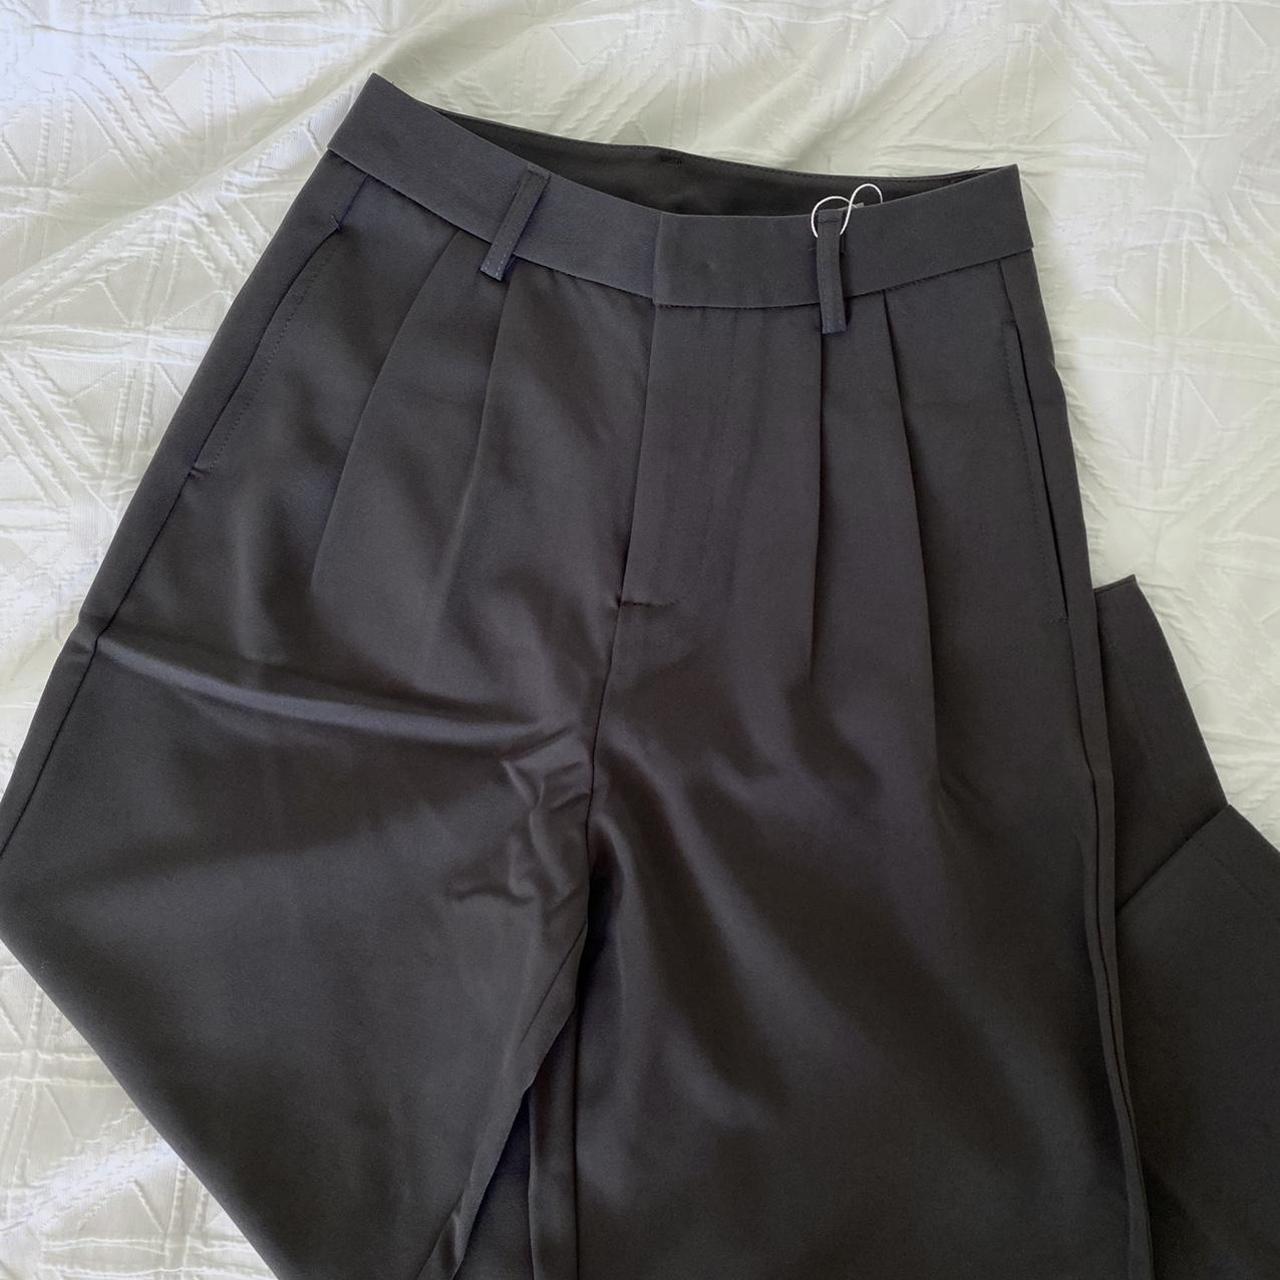 Women's Black and Grey Trousers | Depop